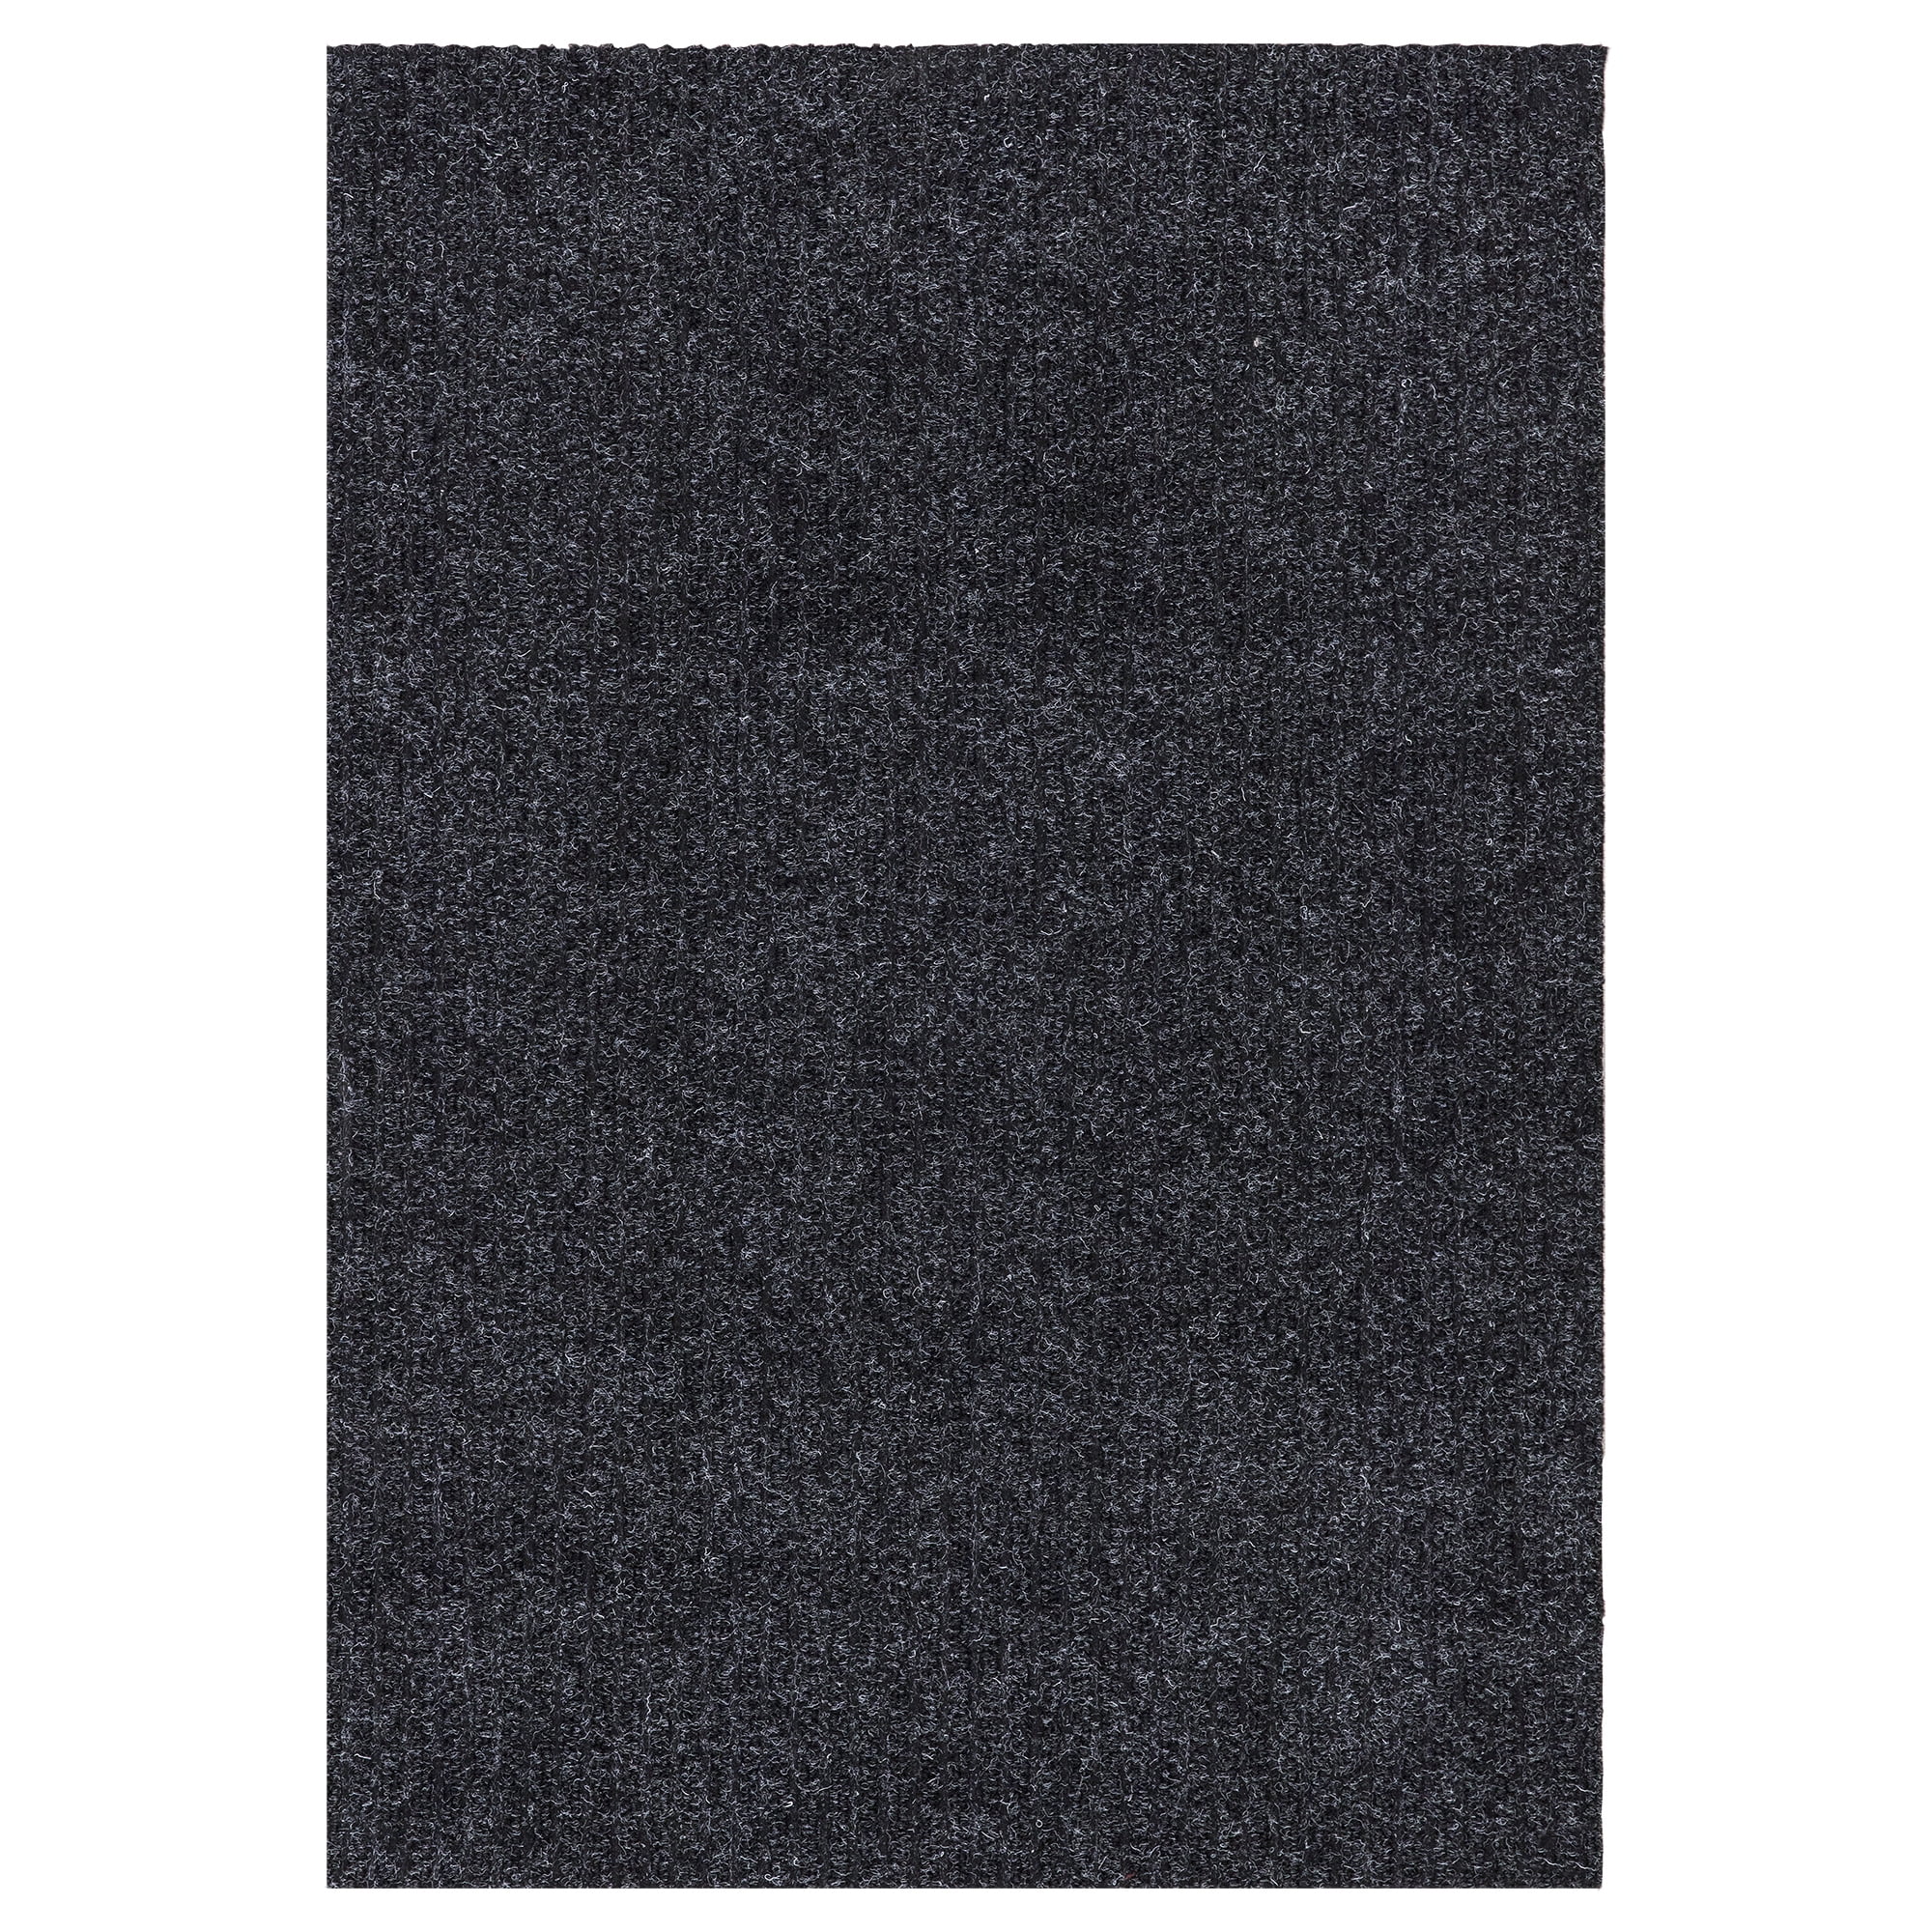 Ottomanson Utility Collection Waterproof Non-Slip Rubberback Solid 2x3 Indoor/Outdoor Entryway Mat, 2 ft. x 3 ft., Gray